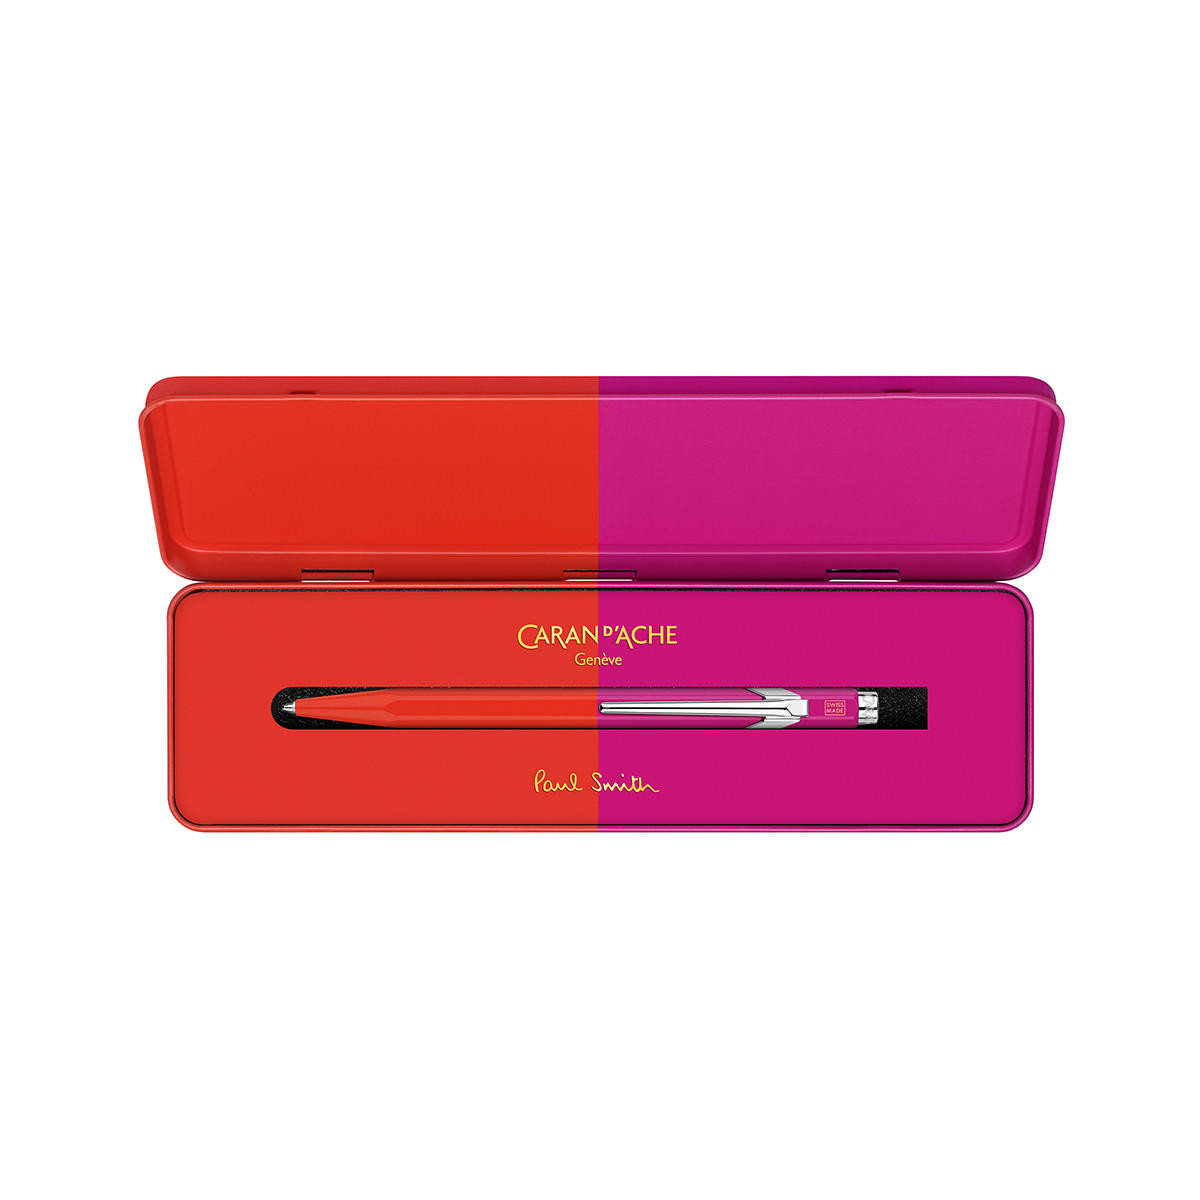 Caran D’ache 849 Ballpoint Pen in Slimpack Paul Smith Edition Warm Red/Melrose Pink